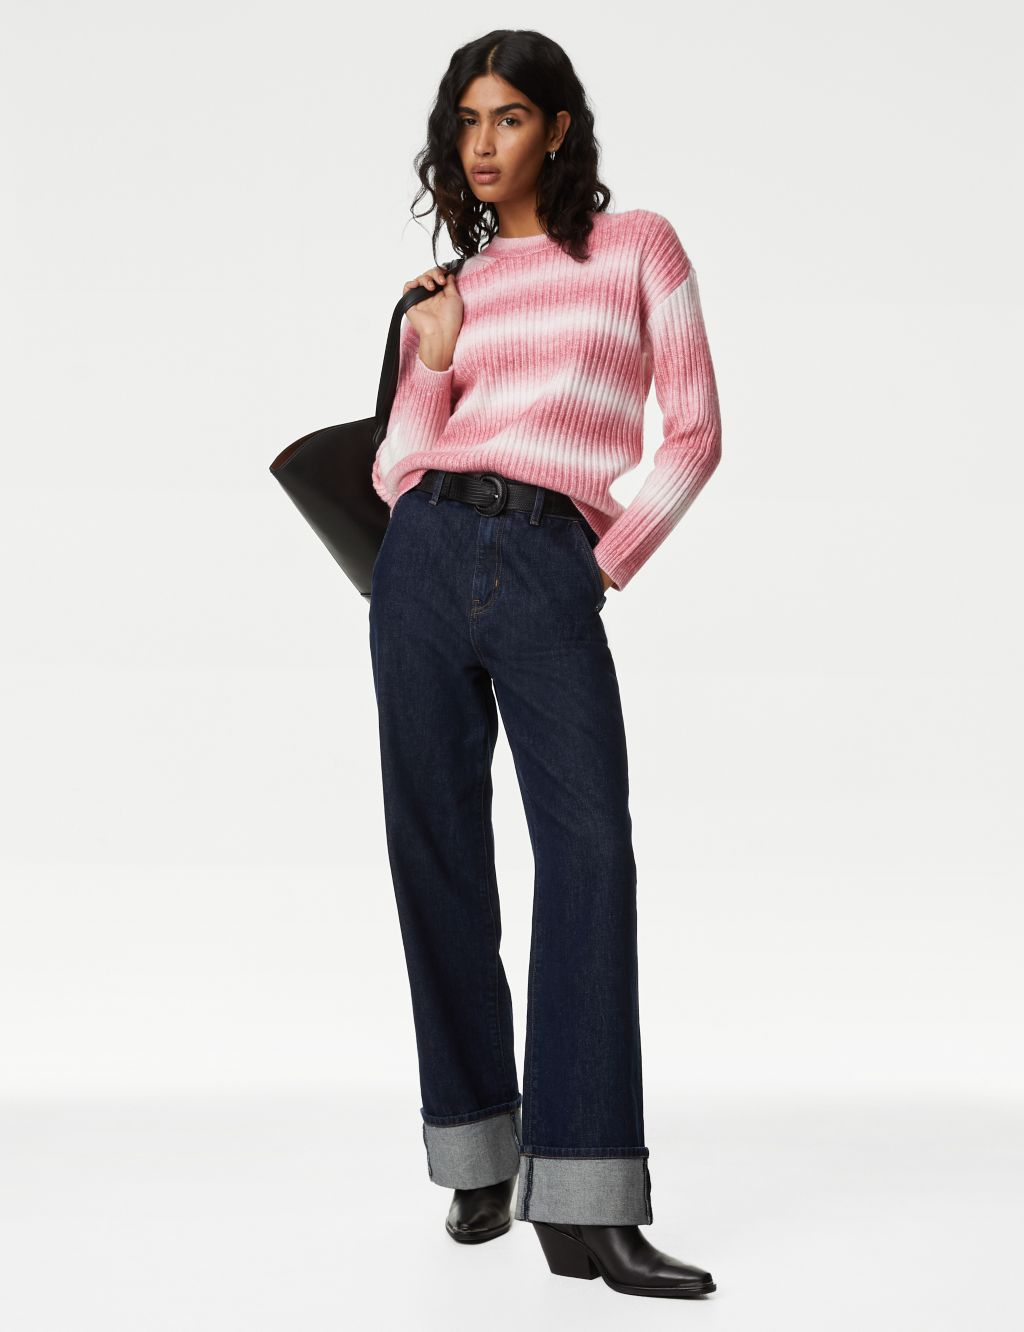 Cloud-Yarn Ombre Striped Crew Neck Jumper image 1